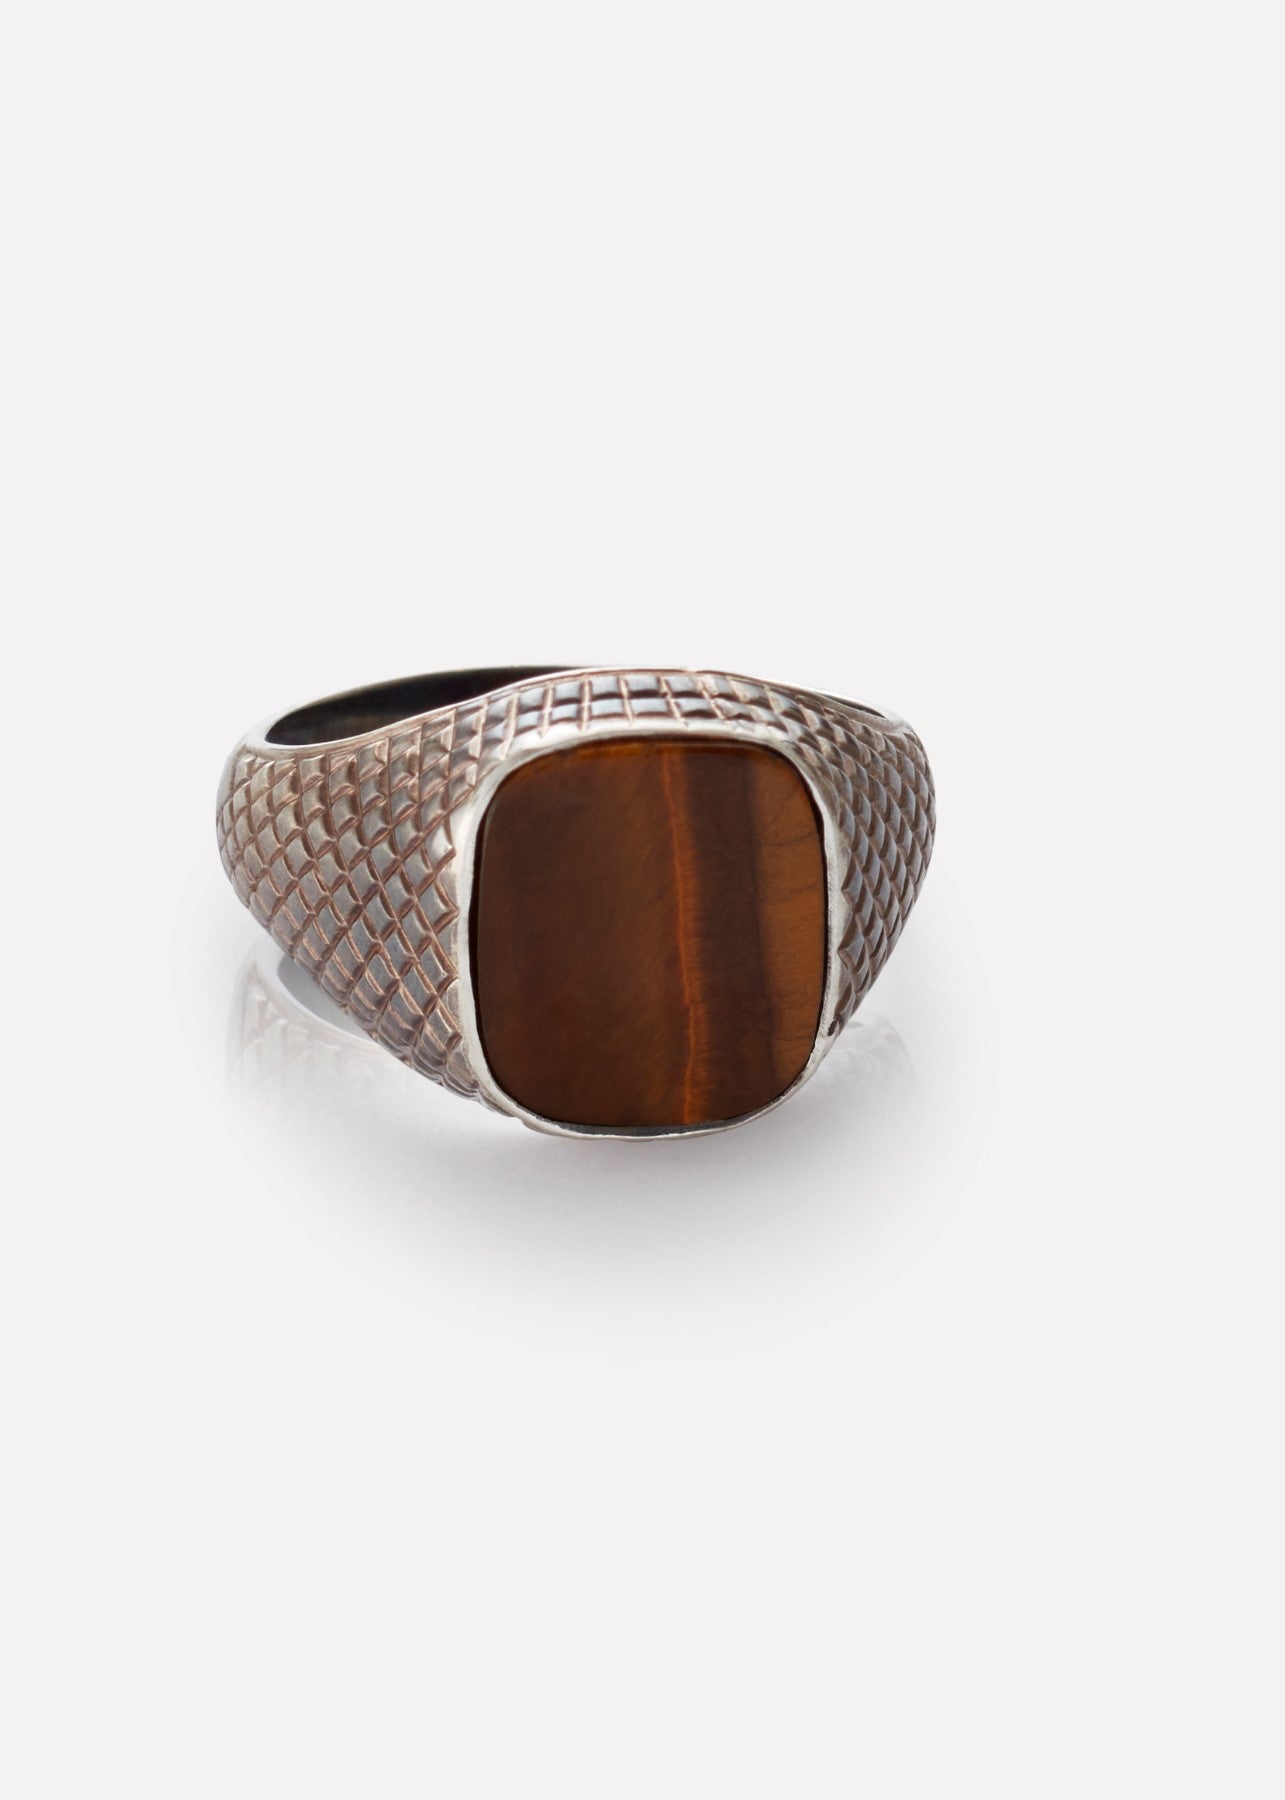 Unisex ring with tiger's eye in silver